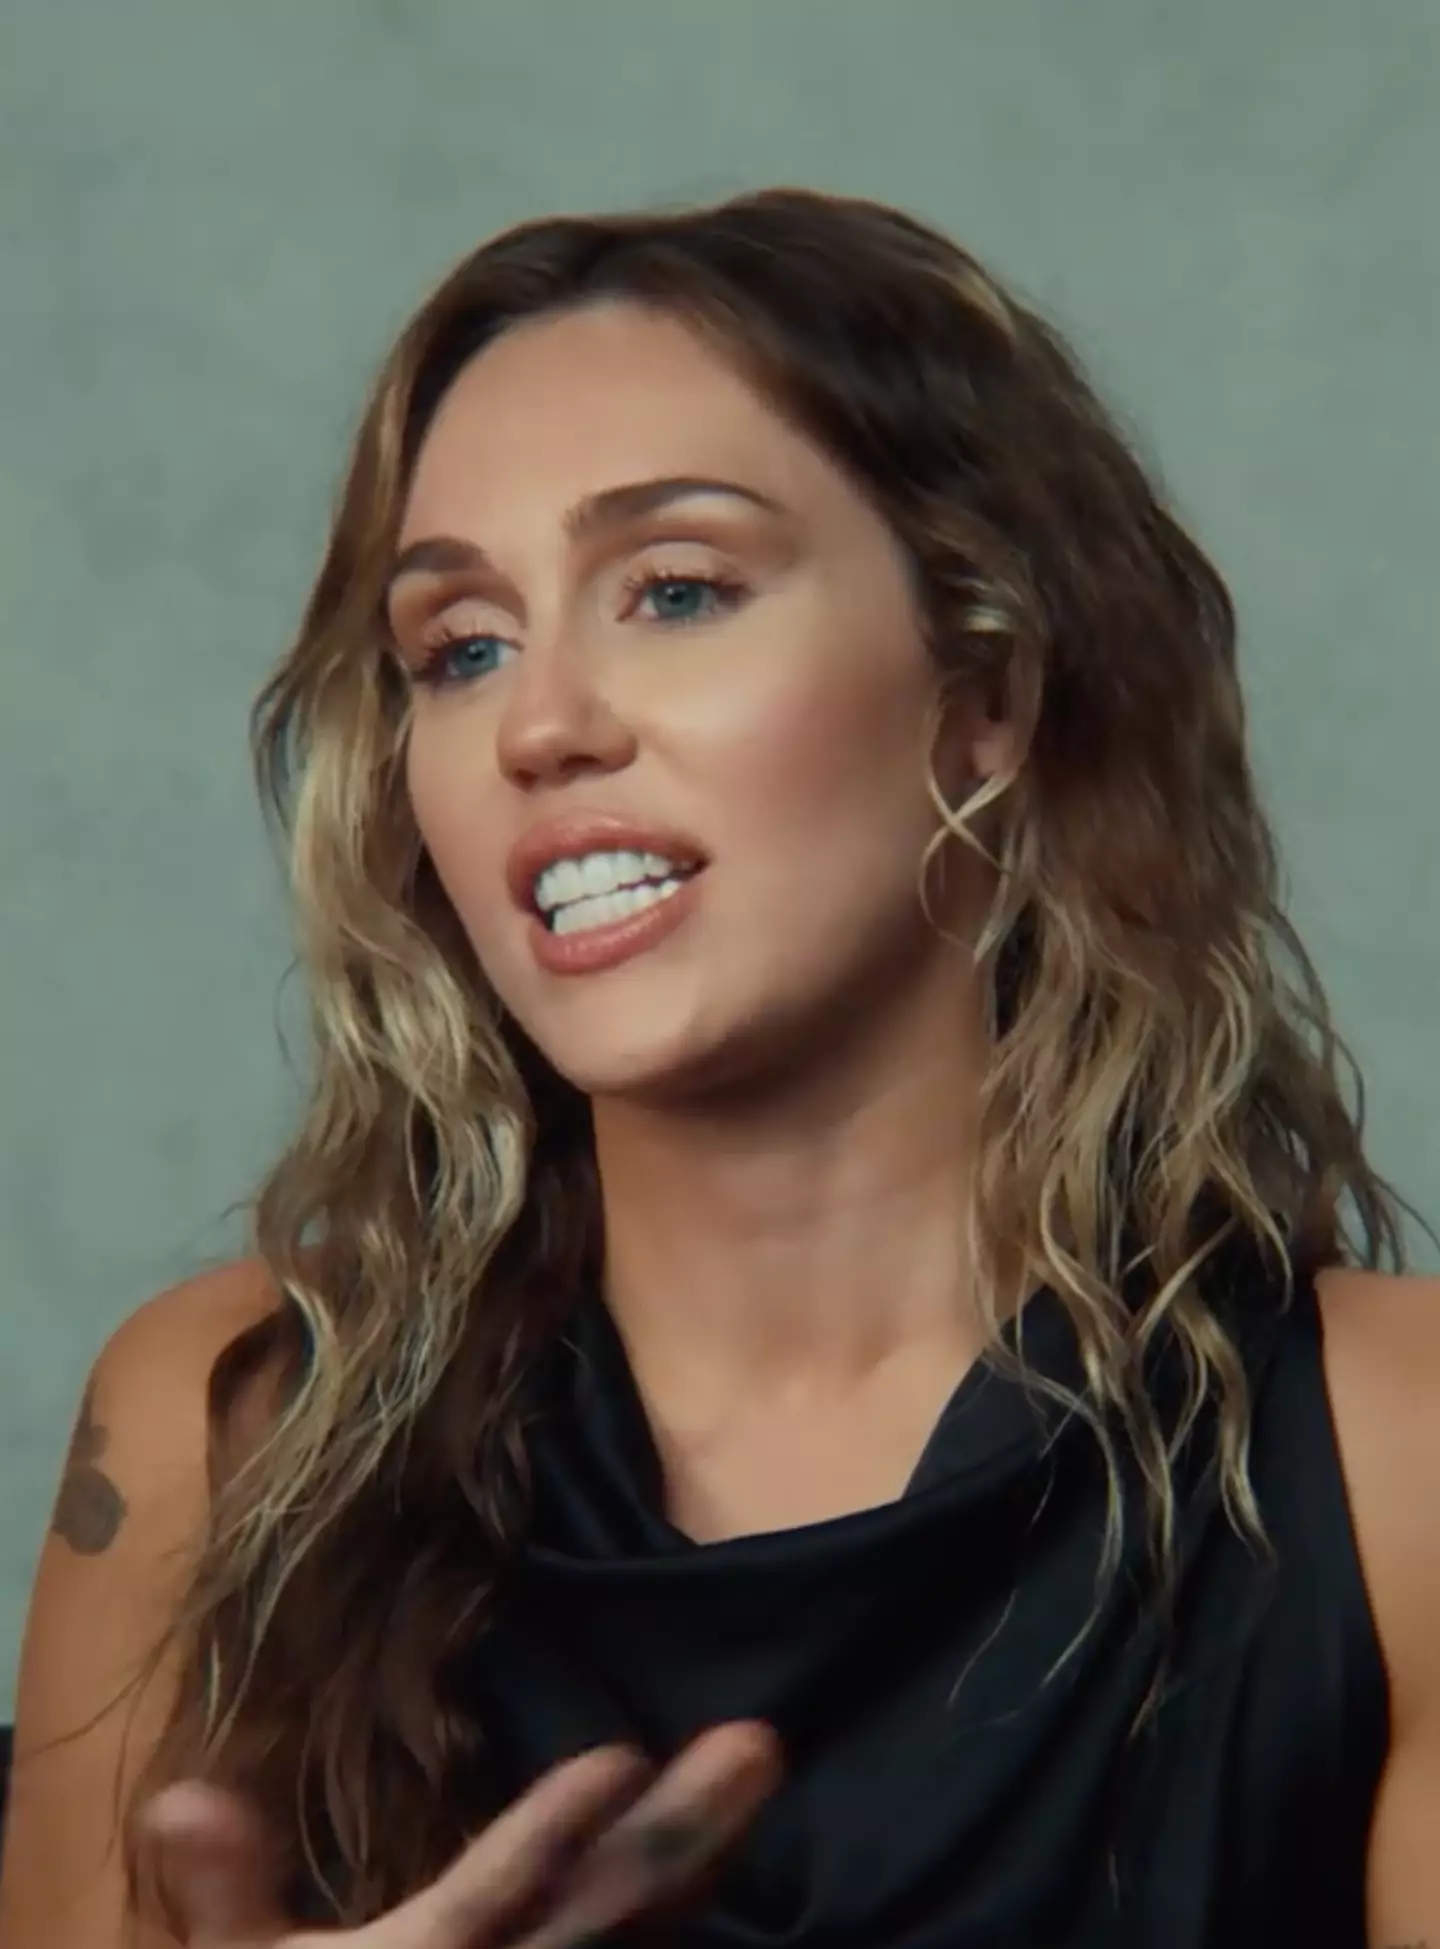 Miley Cyrus opens up about the 2008 shoot.